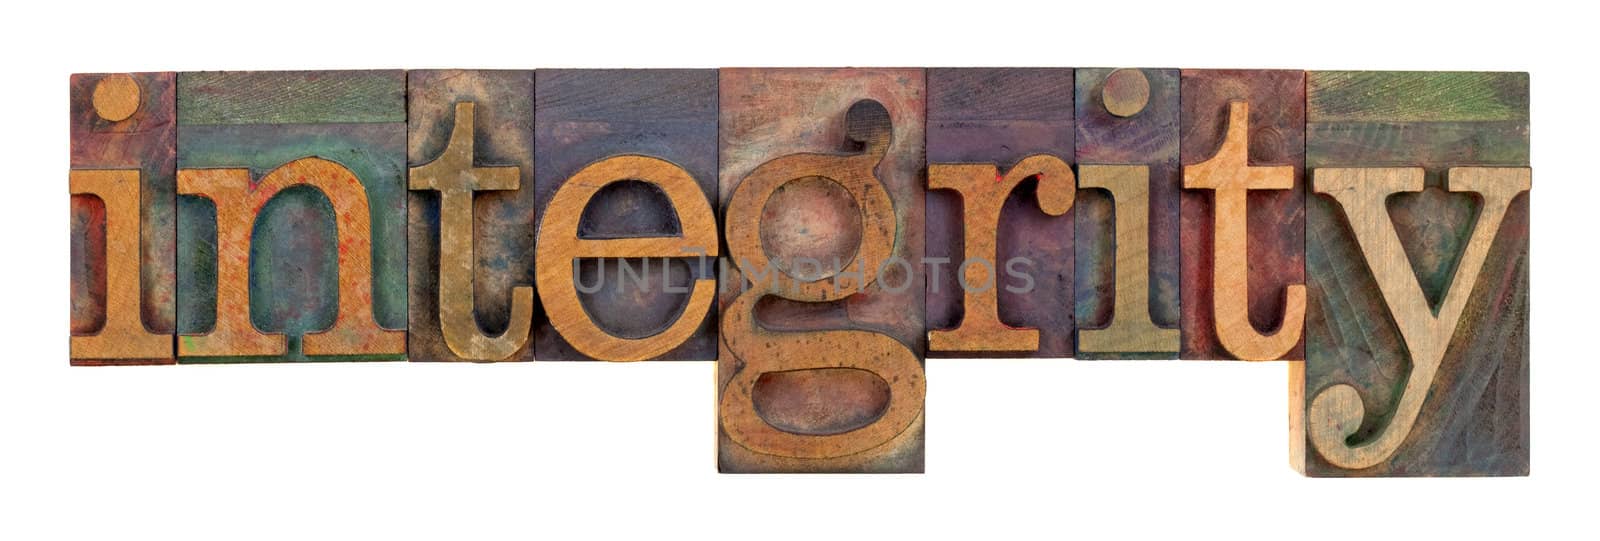 the word of integrity in vintage wood letterpress type, stained by color inks, isolated on white